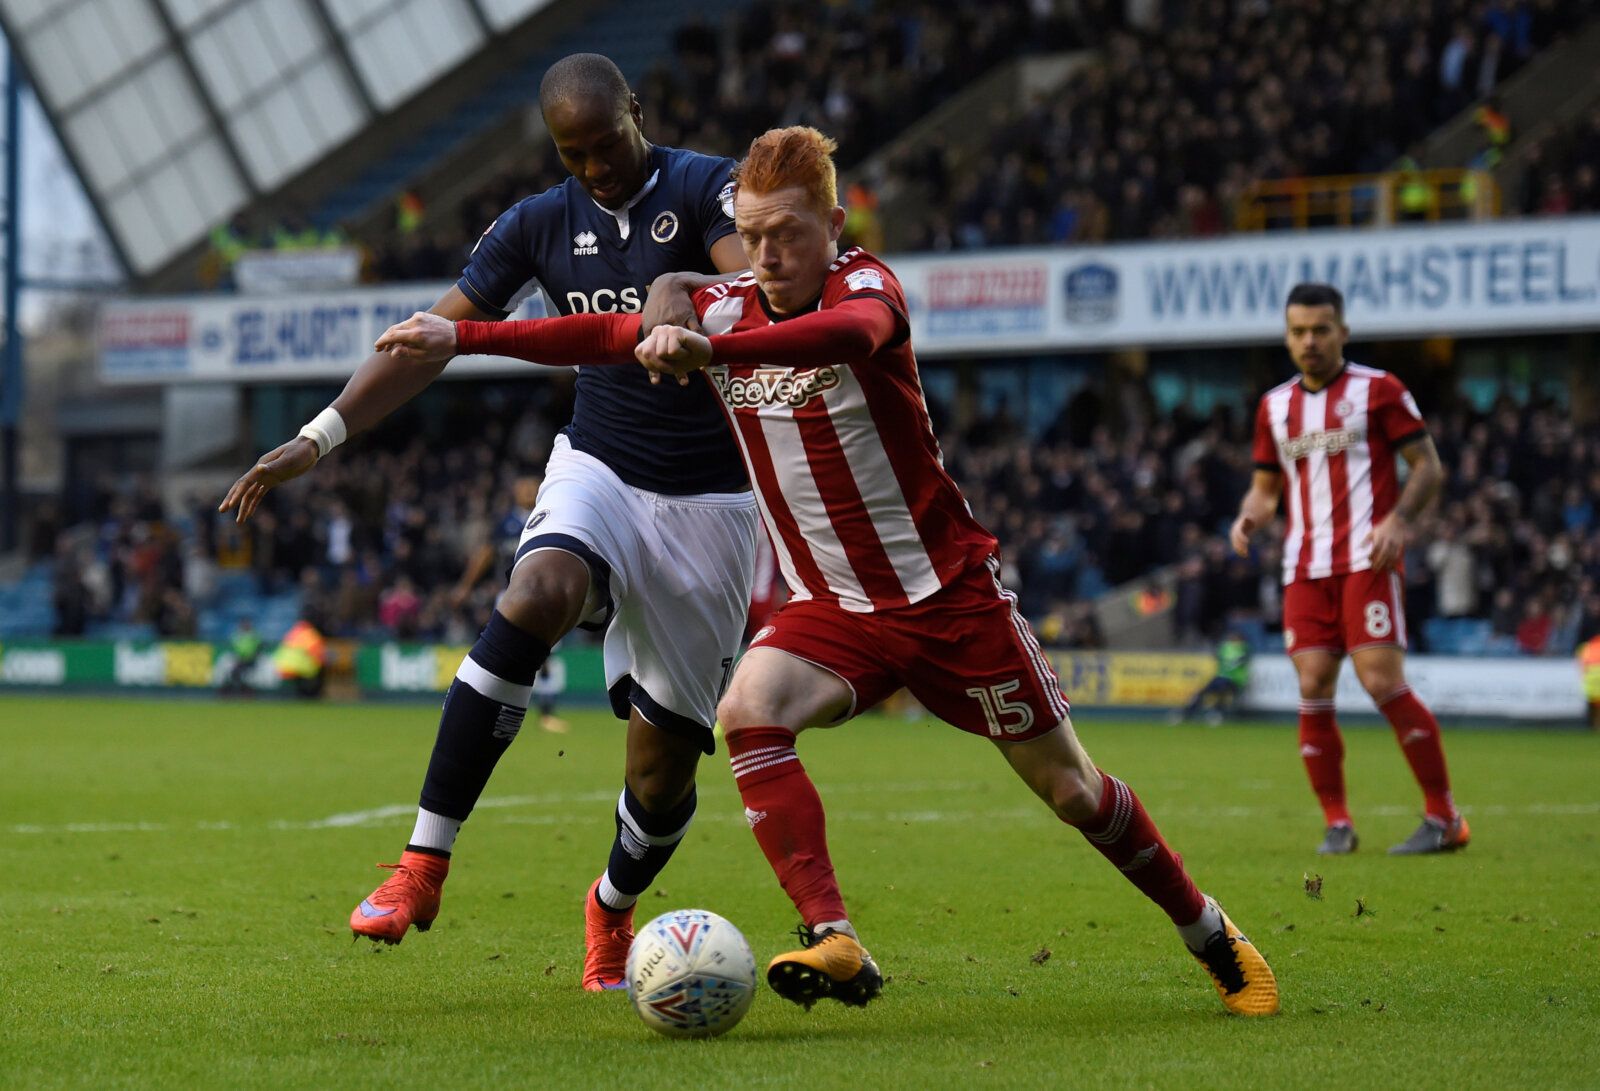 Soccer Football - Championship - Millwall vs Brentford - The Den, London, Britain - March 10, 2018  Brentford's Ryan Woods in action with Millwall's Tom Elliott  Action Images/Adam Holt  EDITORIAL USE ONLY. No use with unauthorized audio, video, data, fixture lists, club/league logos or 